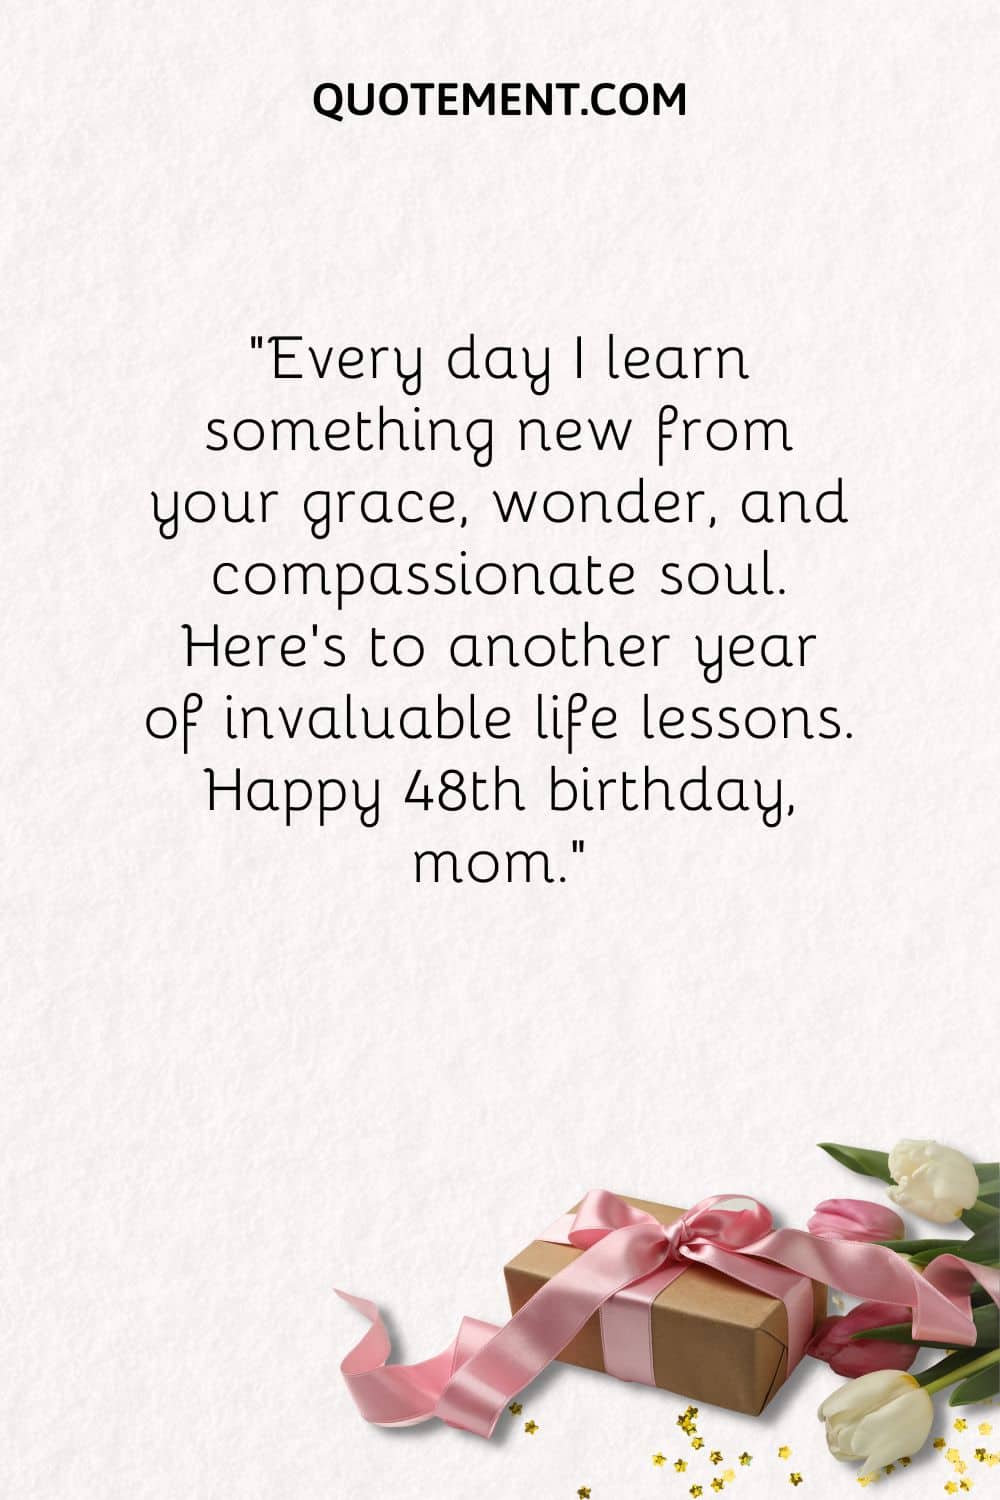 Every day I learn something new from your grace, wonder, and compassionate soul